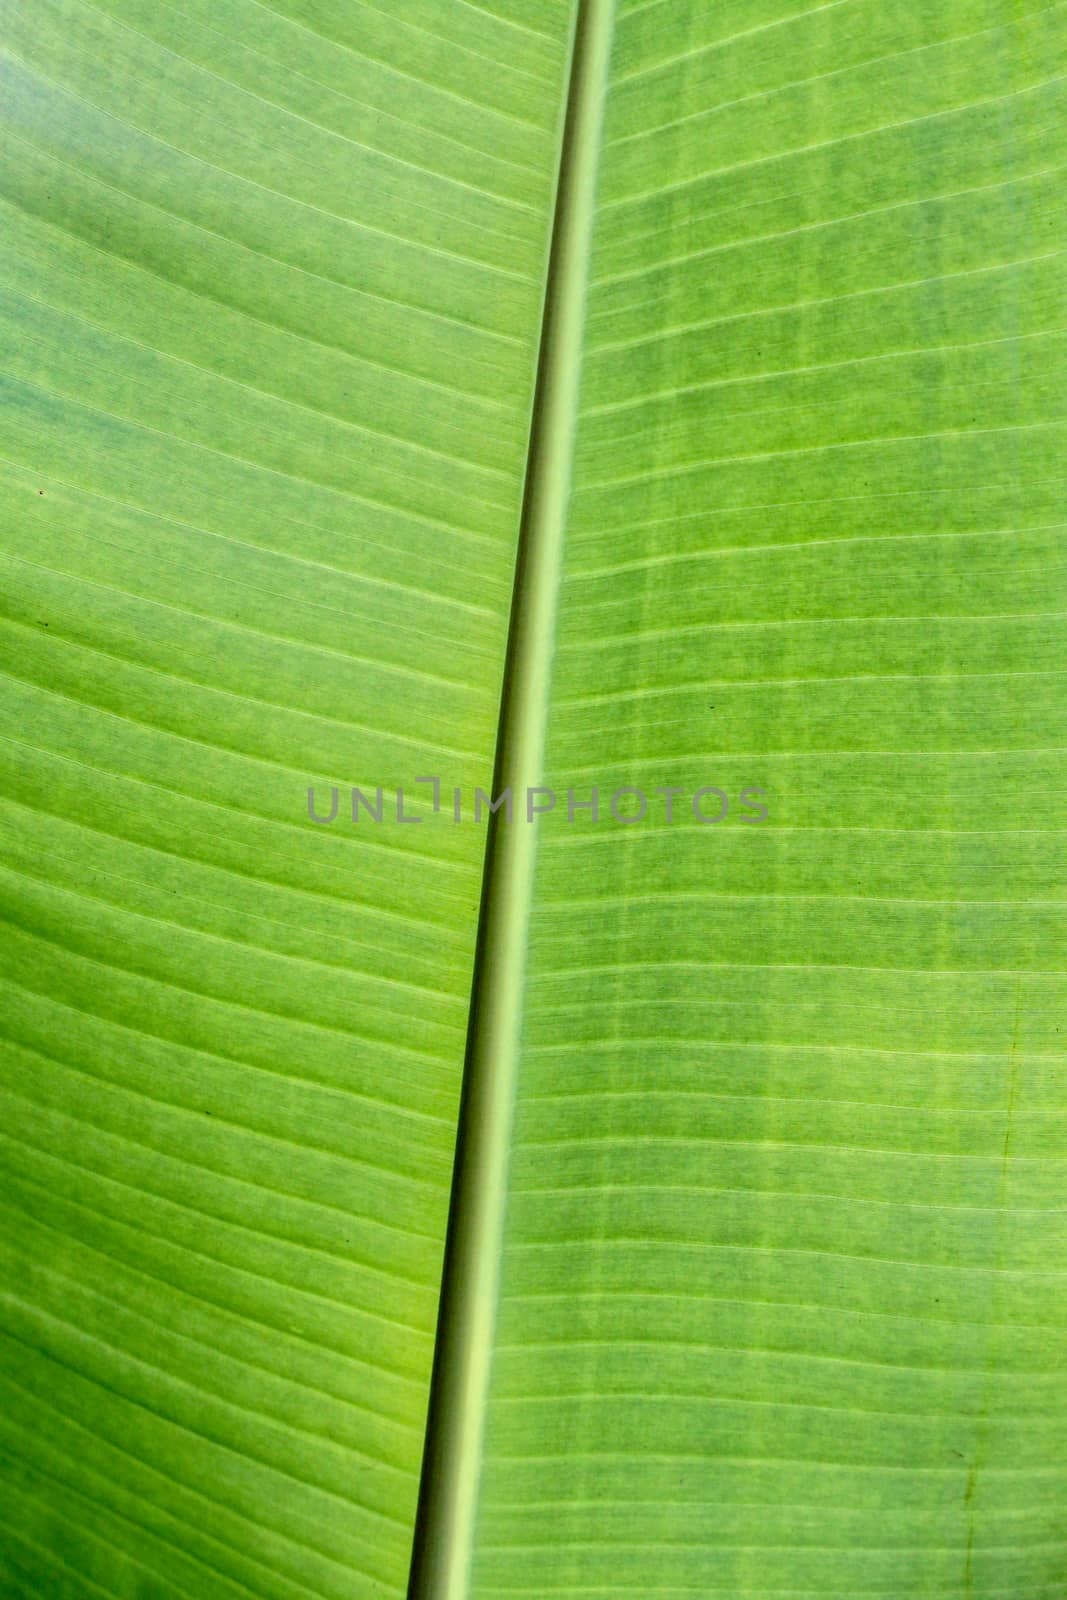 close up banana leaf pattern with outdoor back light. Selective  by pumppump